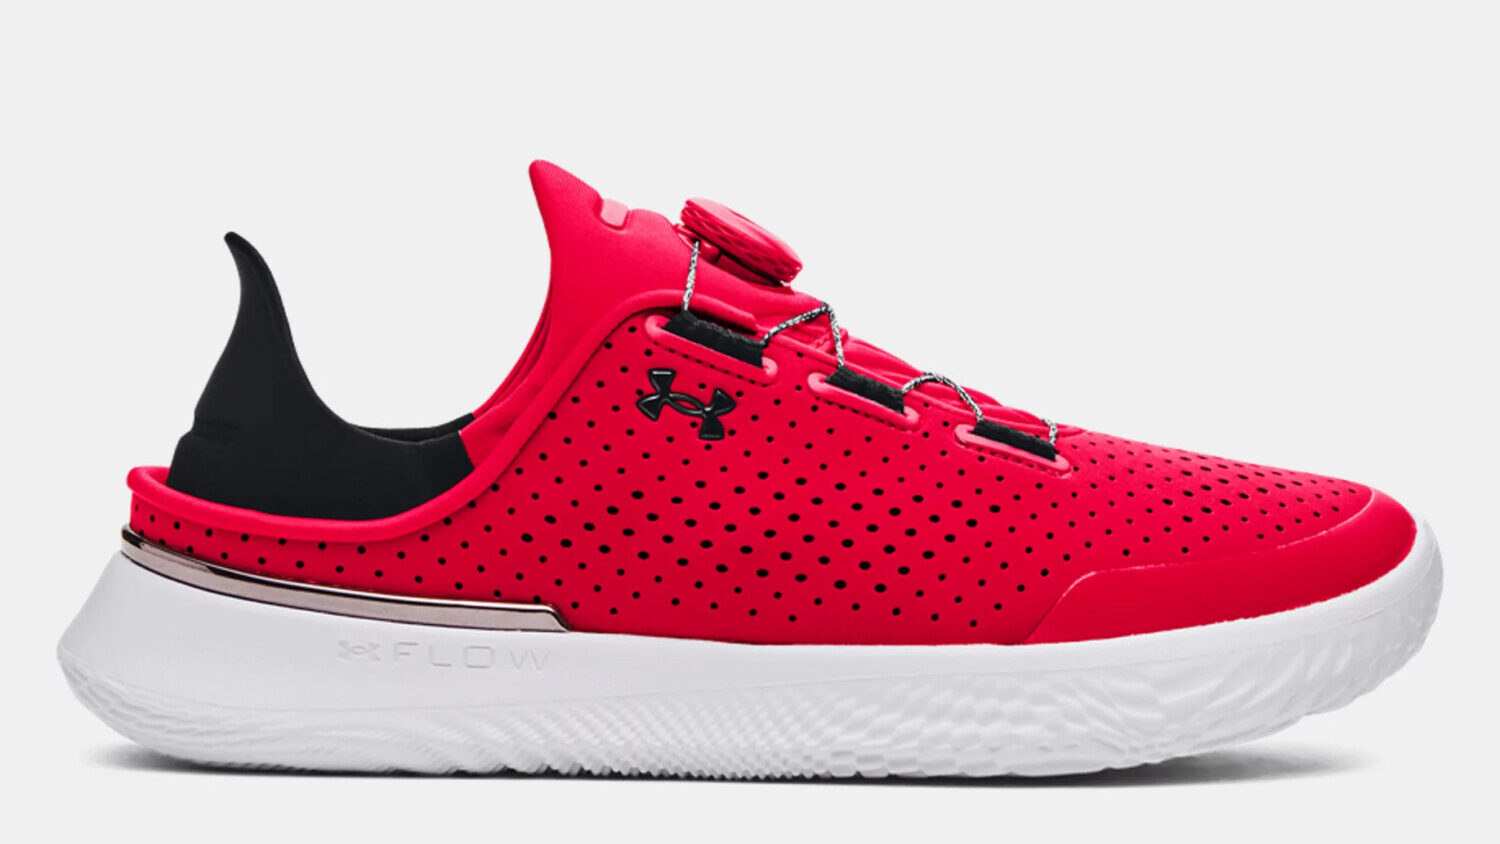 Under Armour SlipSpeed shoe in red